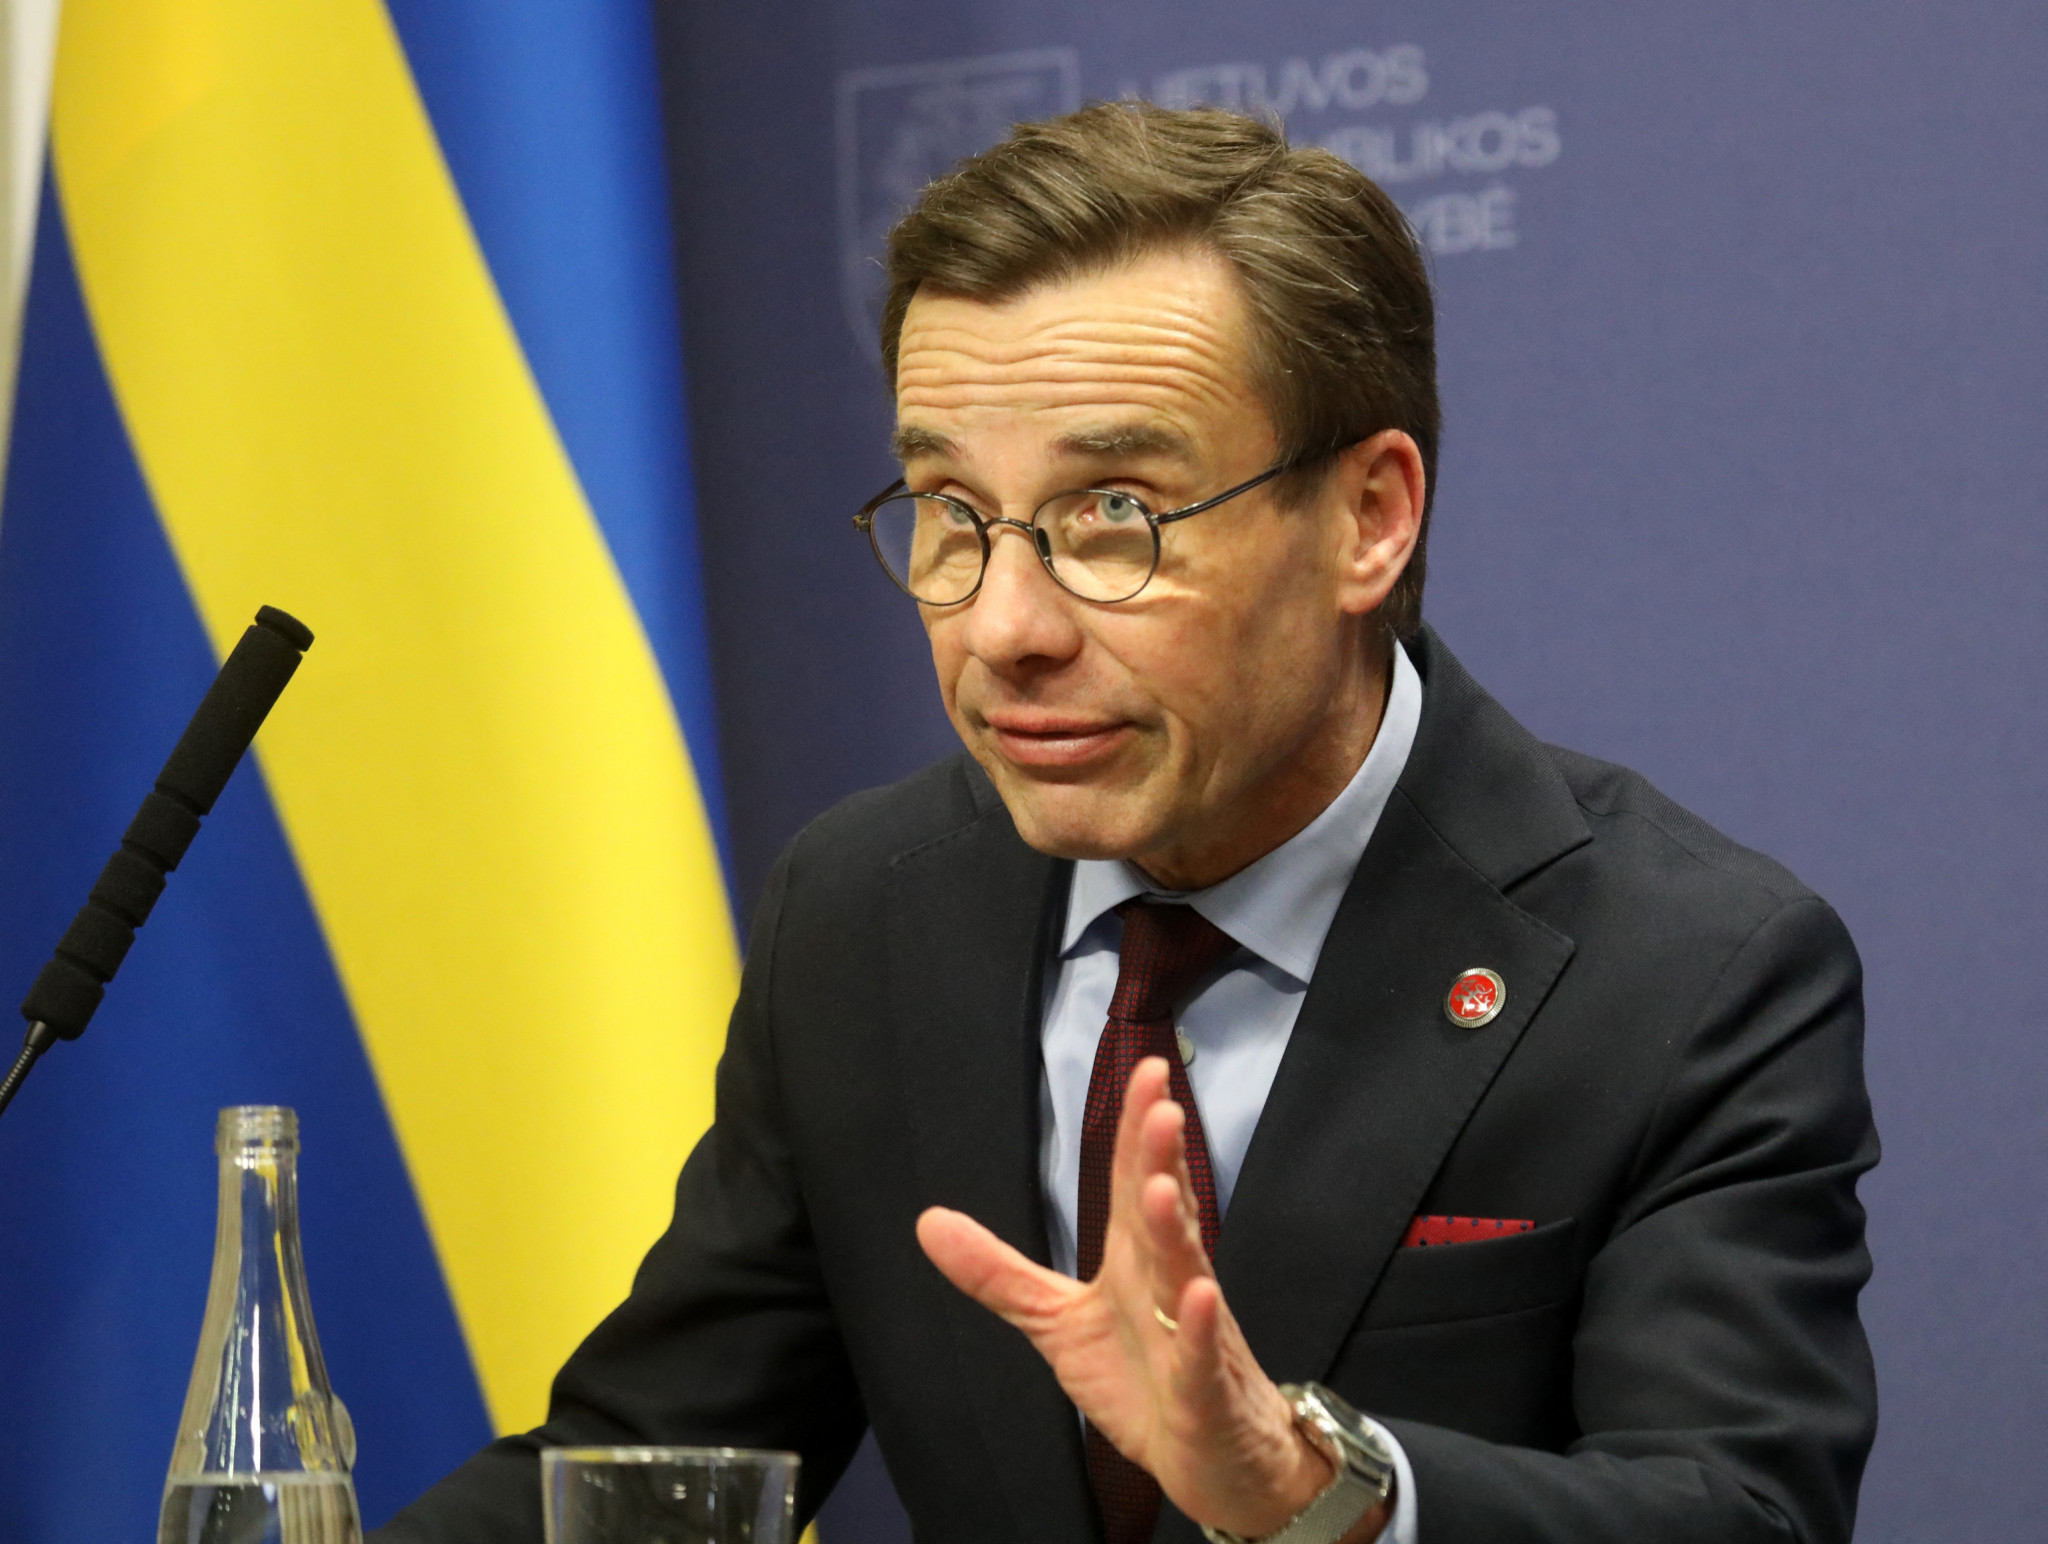 Sweden’s Prime Minister Ulf Kristersson said he did not want to draw any "hasty conclusions" over a bid for the 2030 Winter Olympics until the outcome of a feasibility study ©Getty Images